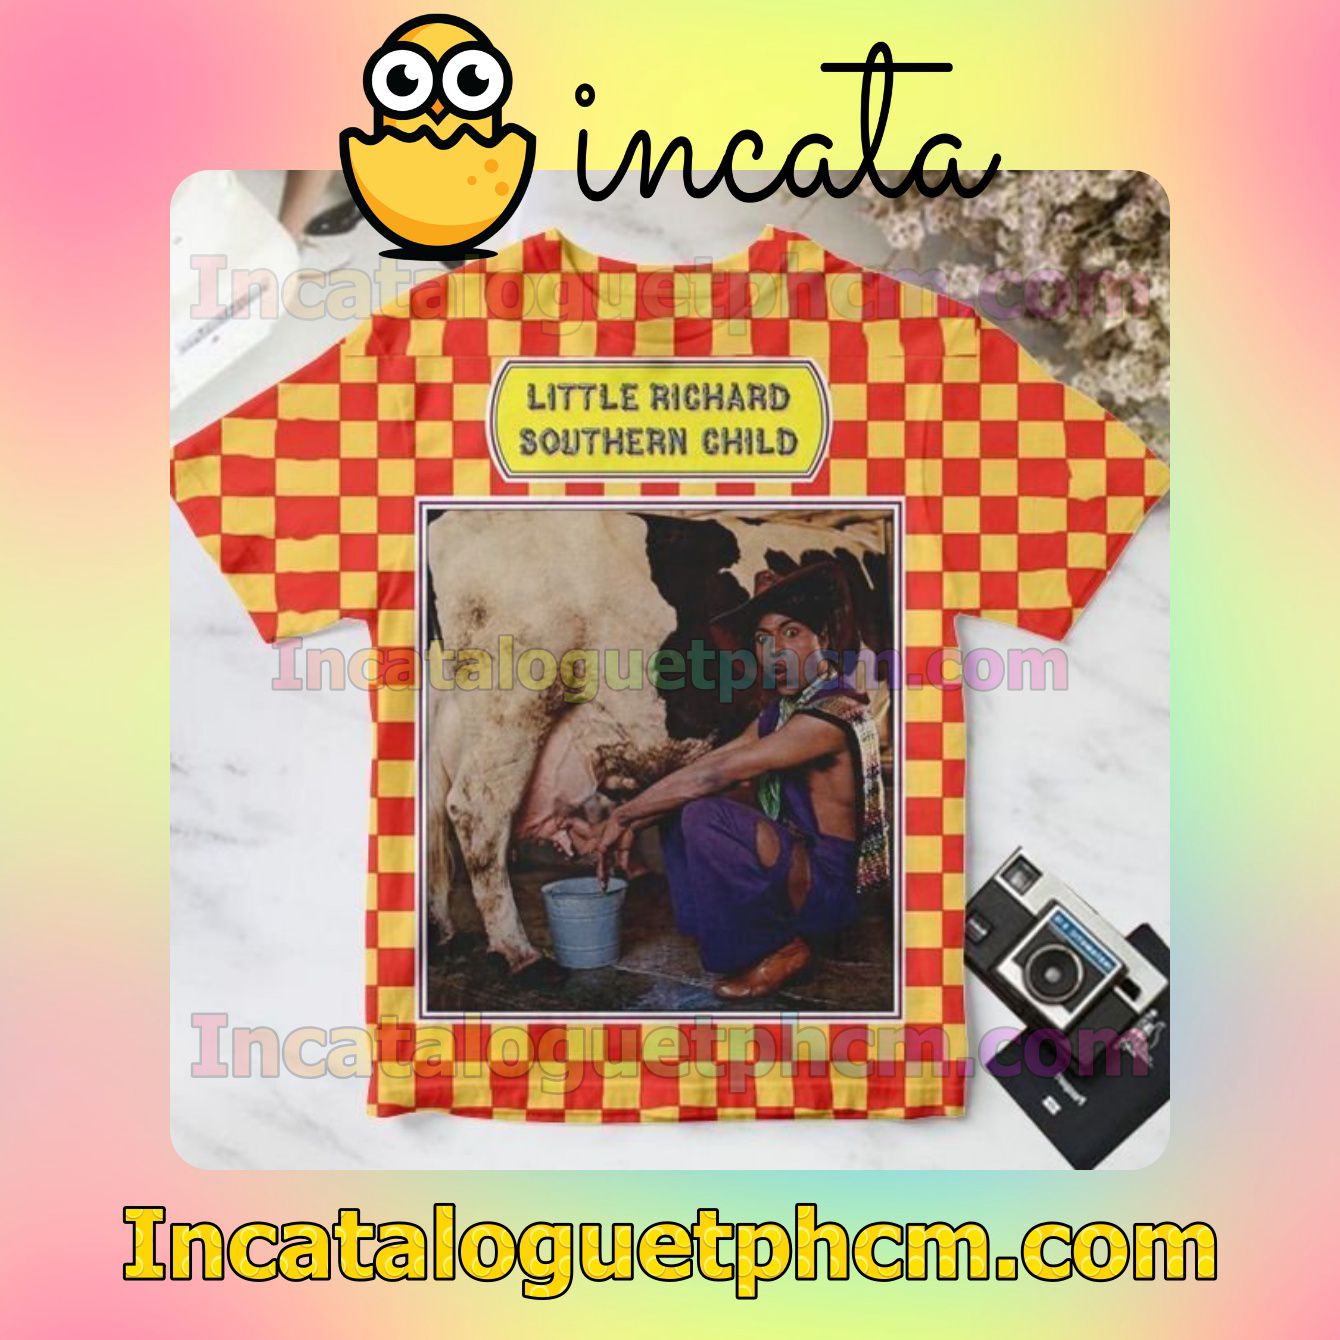 Little Richard Southern Child Album Cover Personalized Shirt